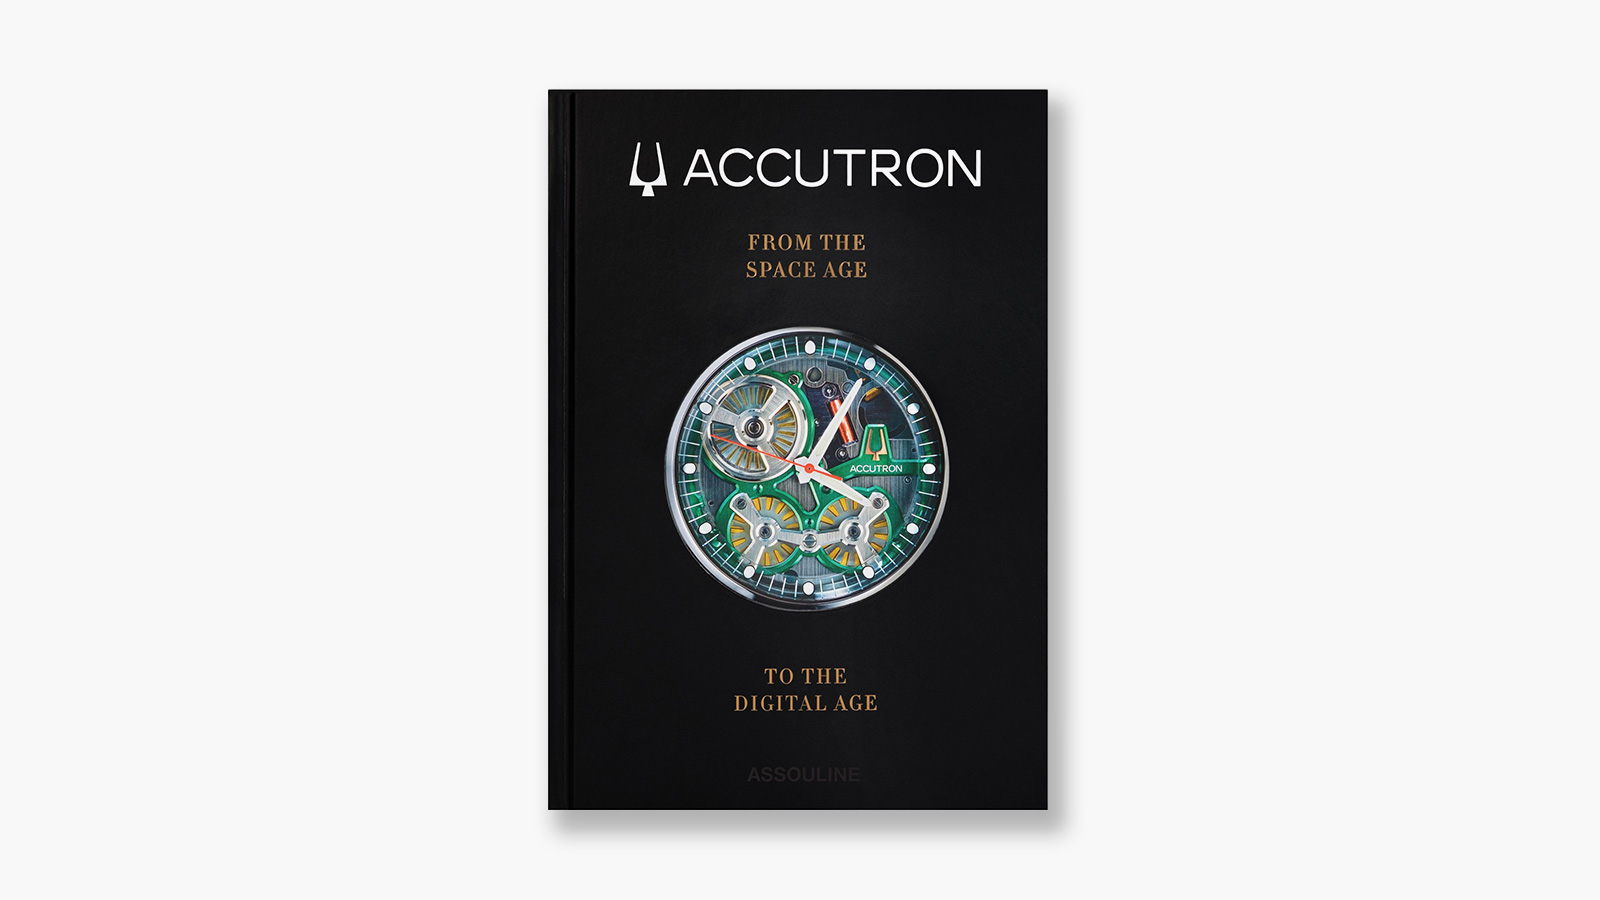 ‘Accutron: From the Space Age to the Digital Age’ by Carl Gustav Magnusson